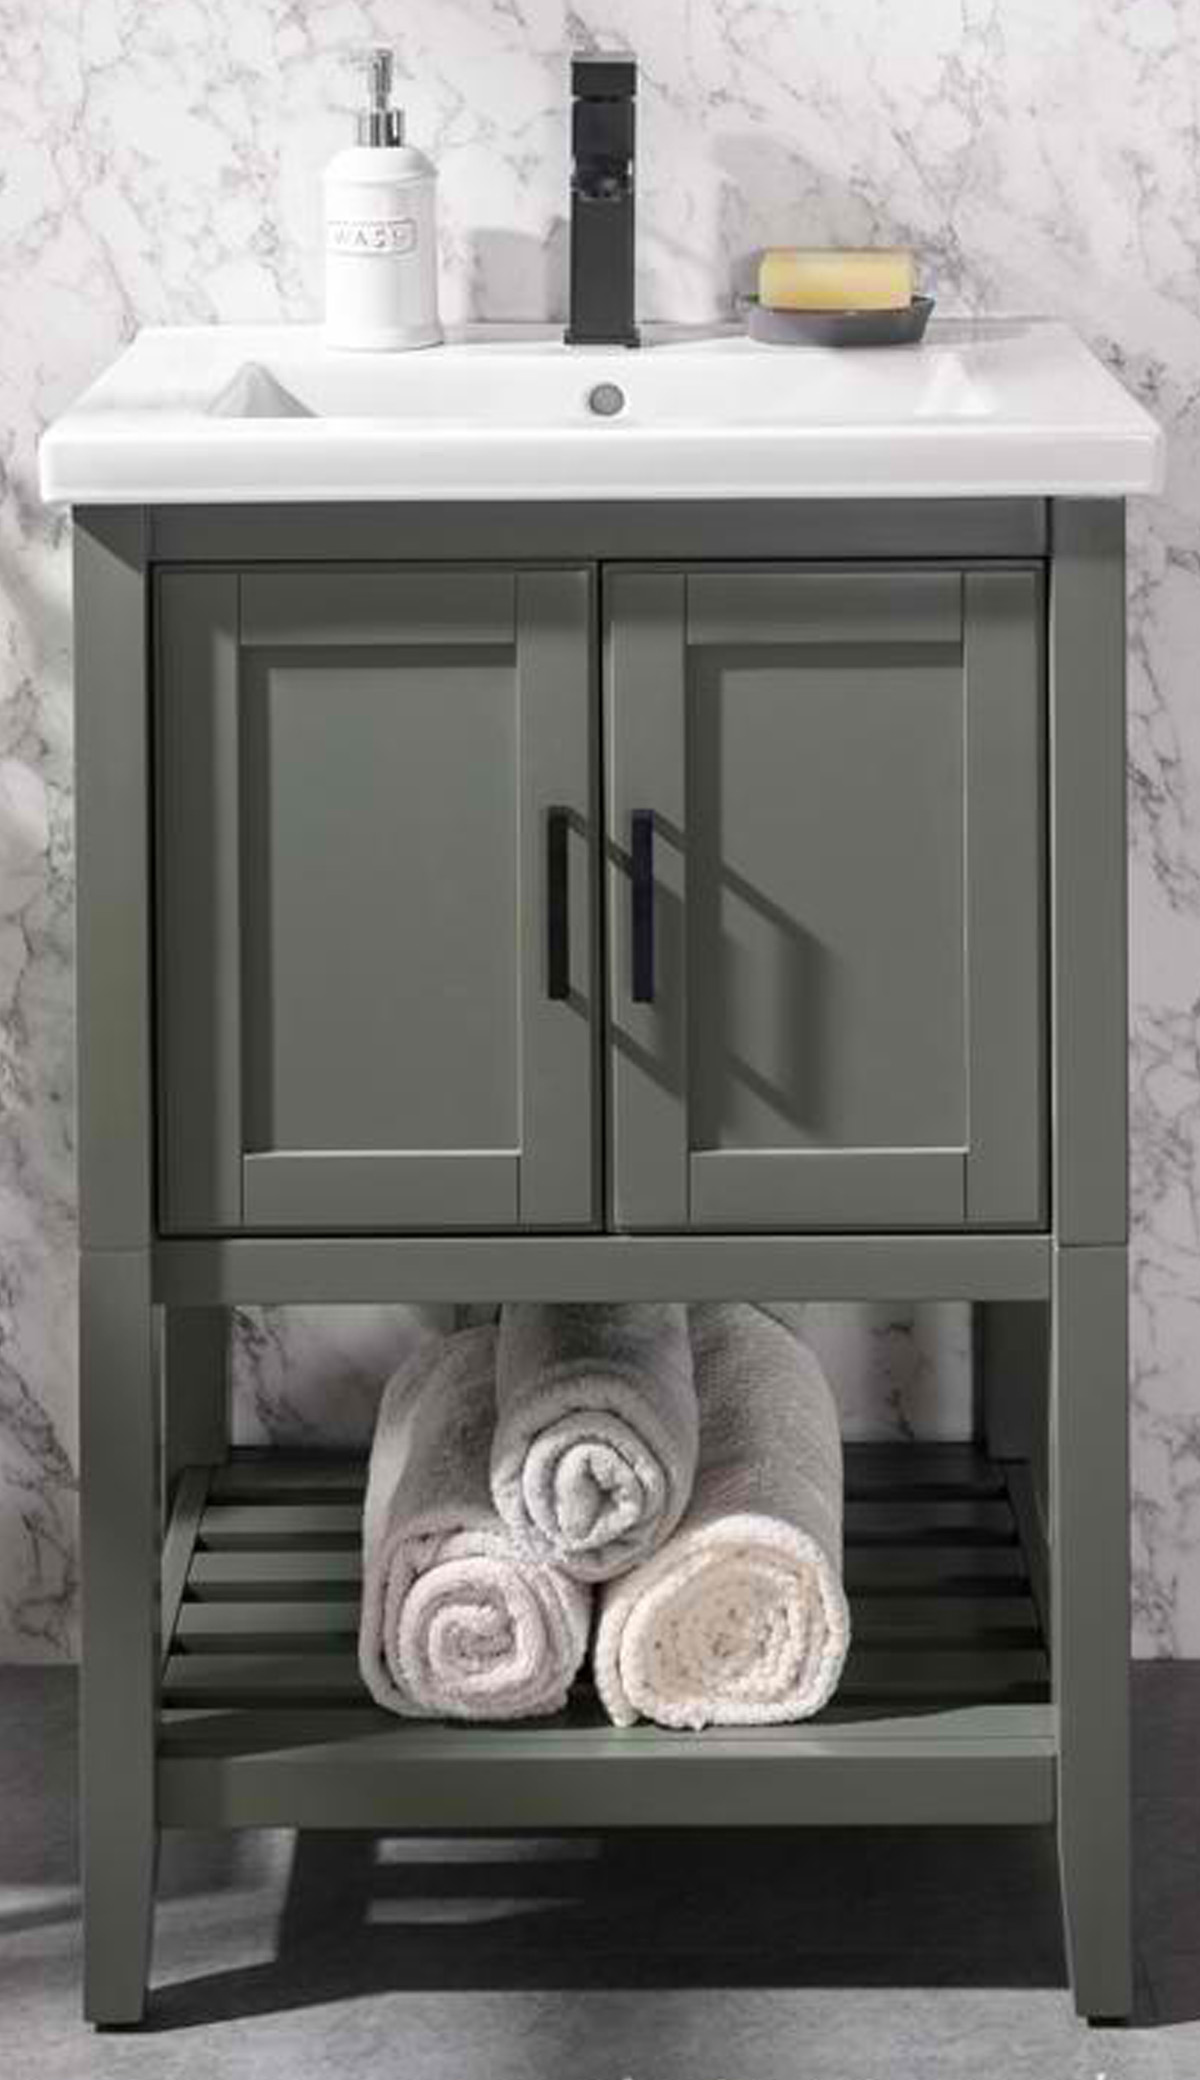 24" Pewter Green Single Sink Bathroom Vanity in Ceramic Top and White Ceramic Sink with Color Options